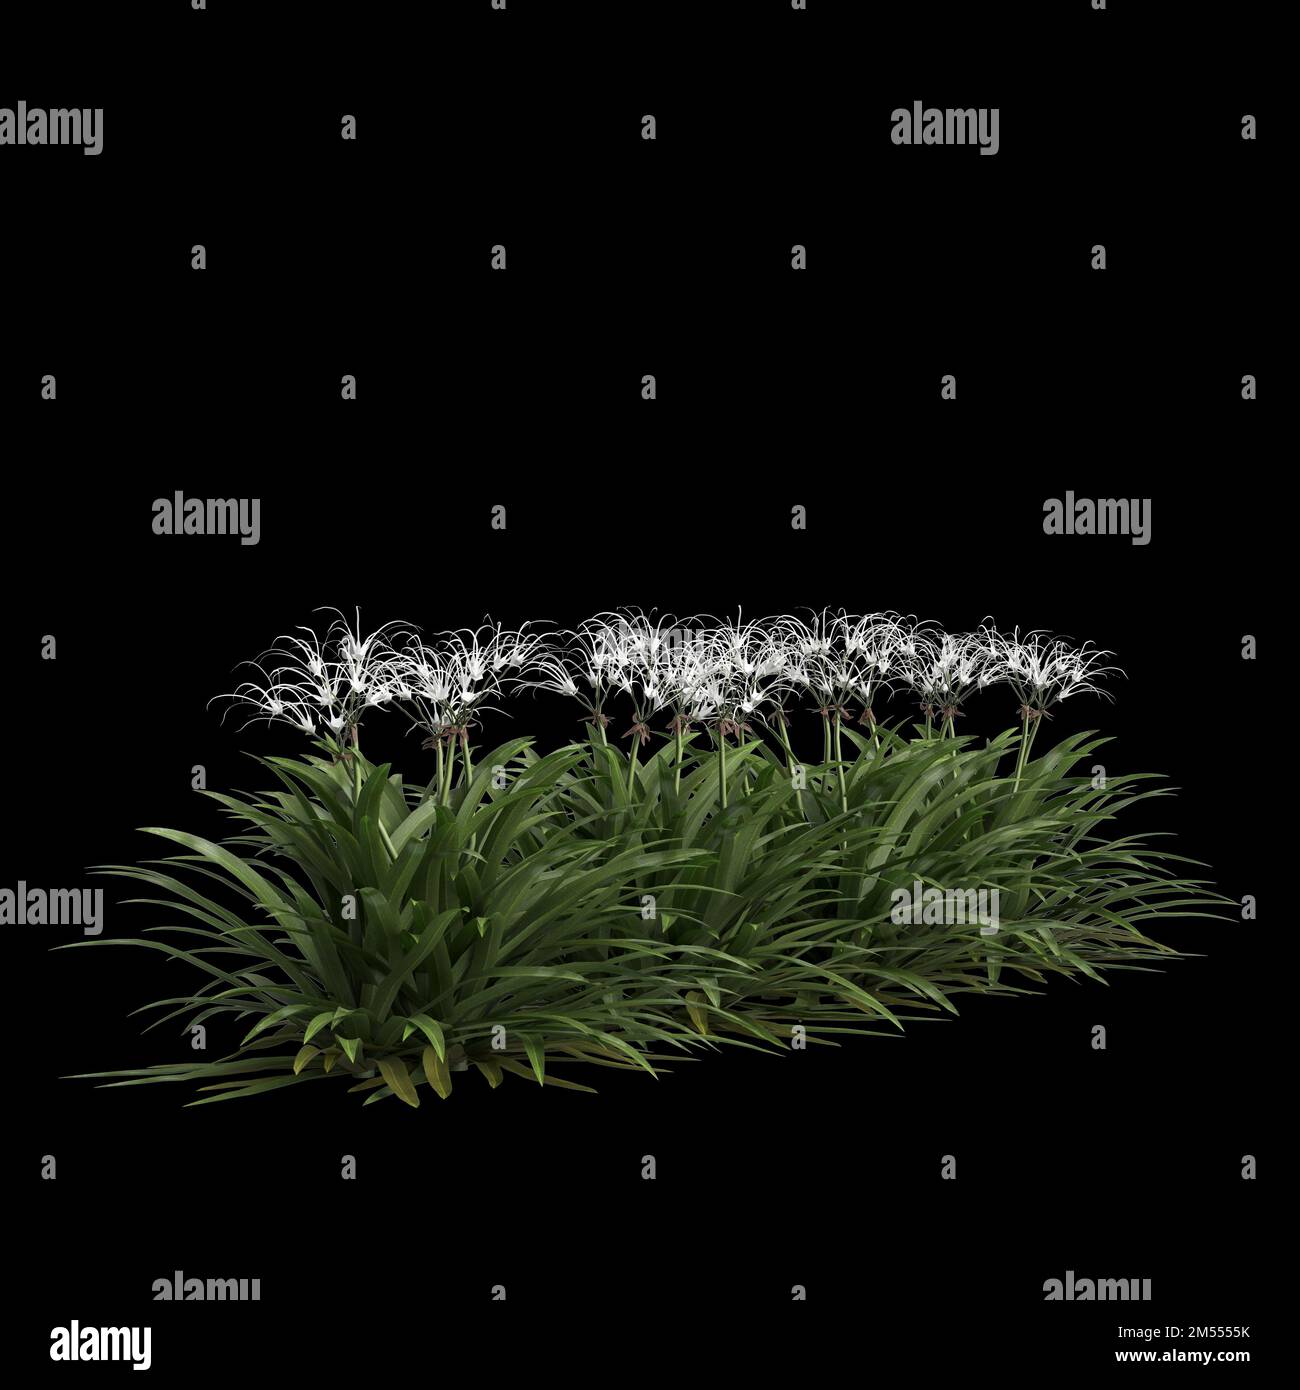 3d illustration of spider lily isolated on black background Stock Photo